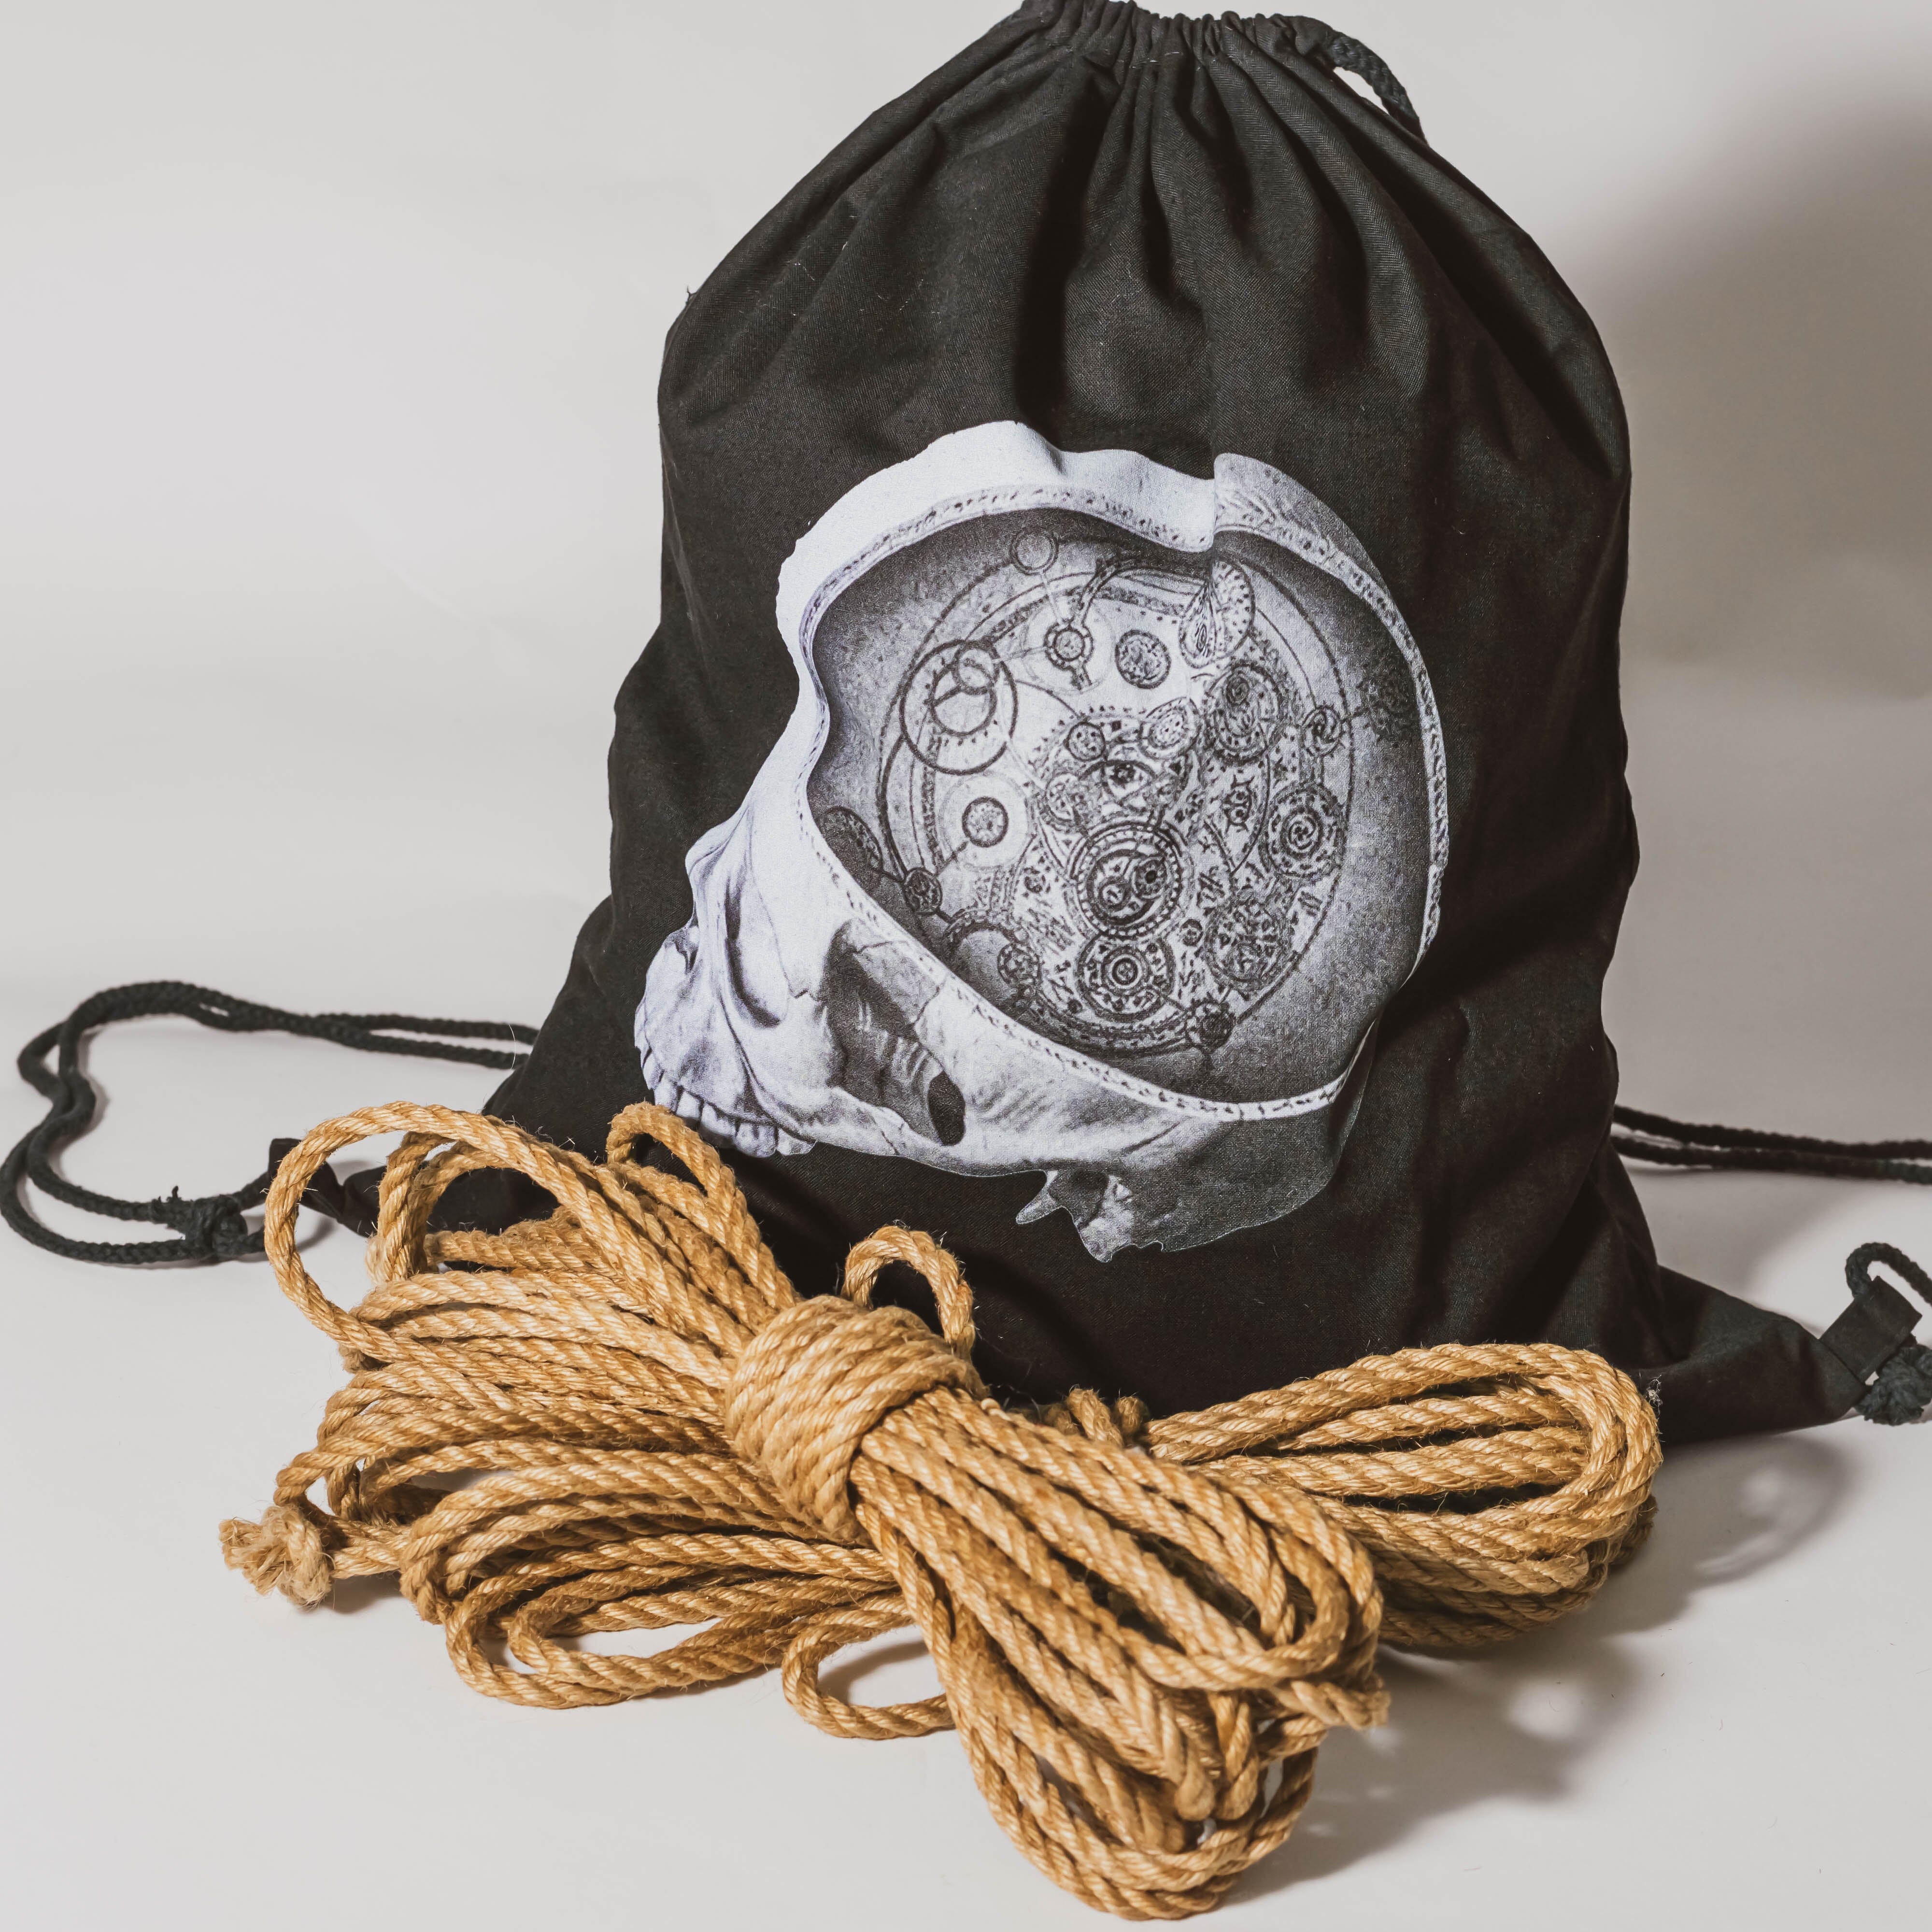 How many ropes do I need for shibari? A helpful guide – Anatomie Rope Shop